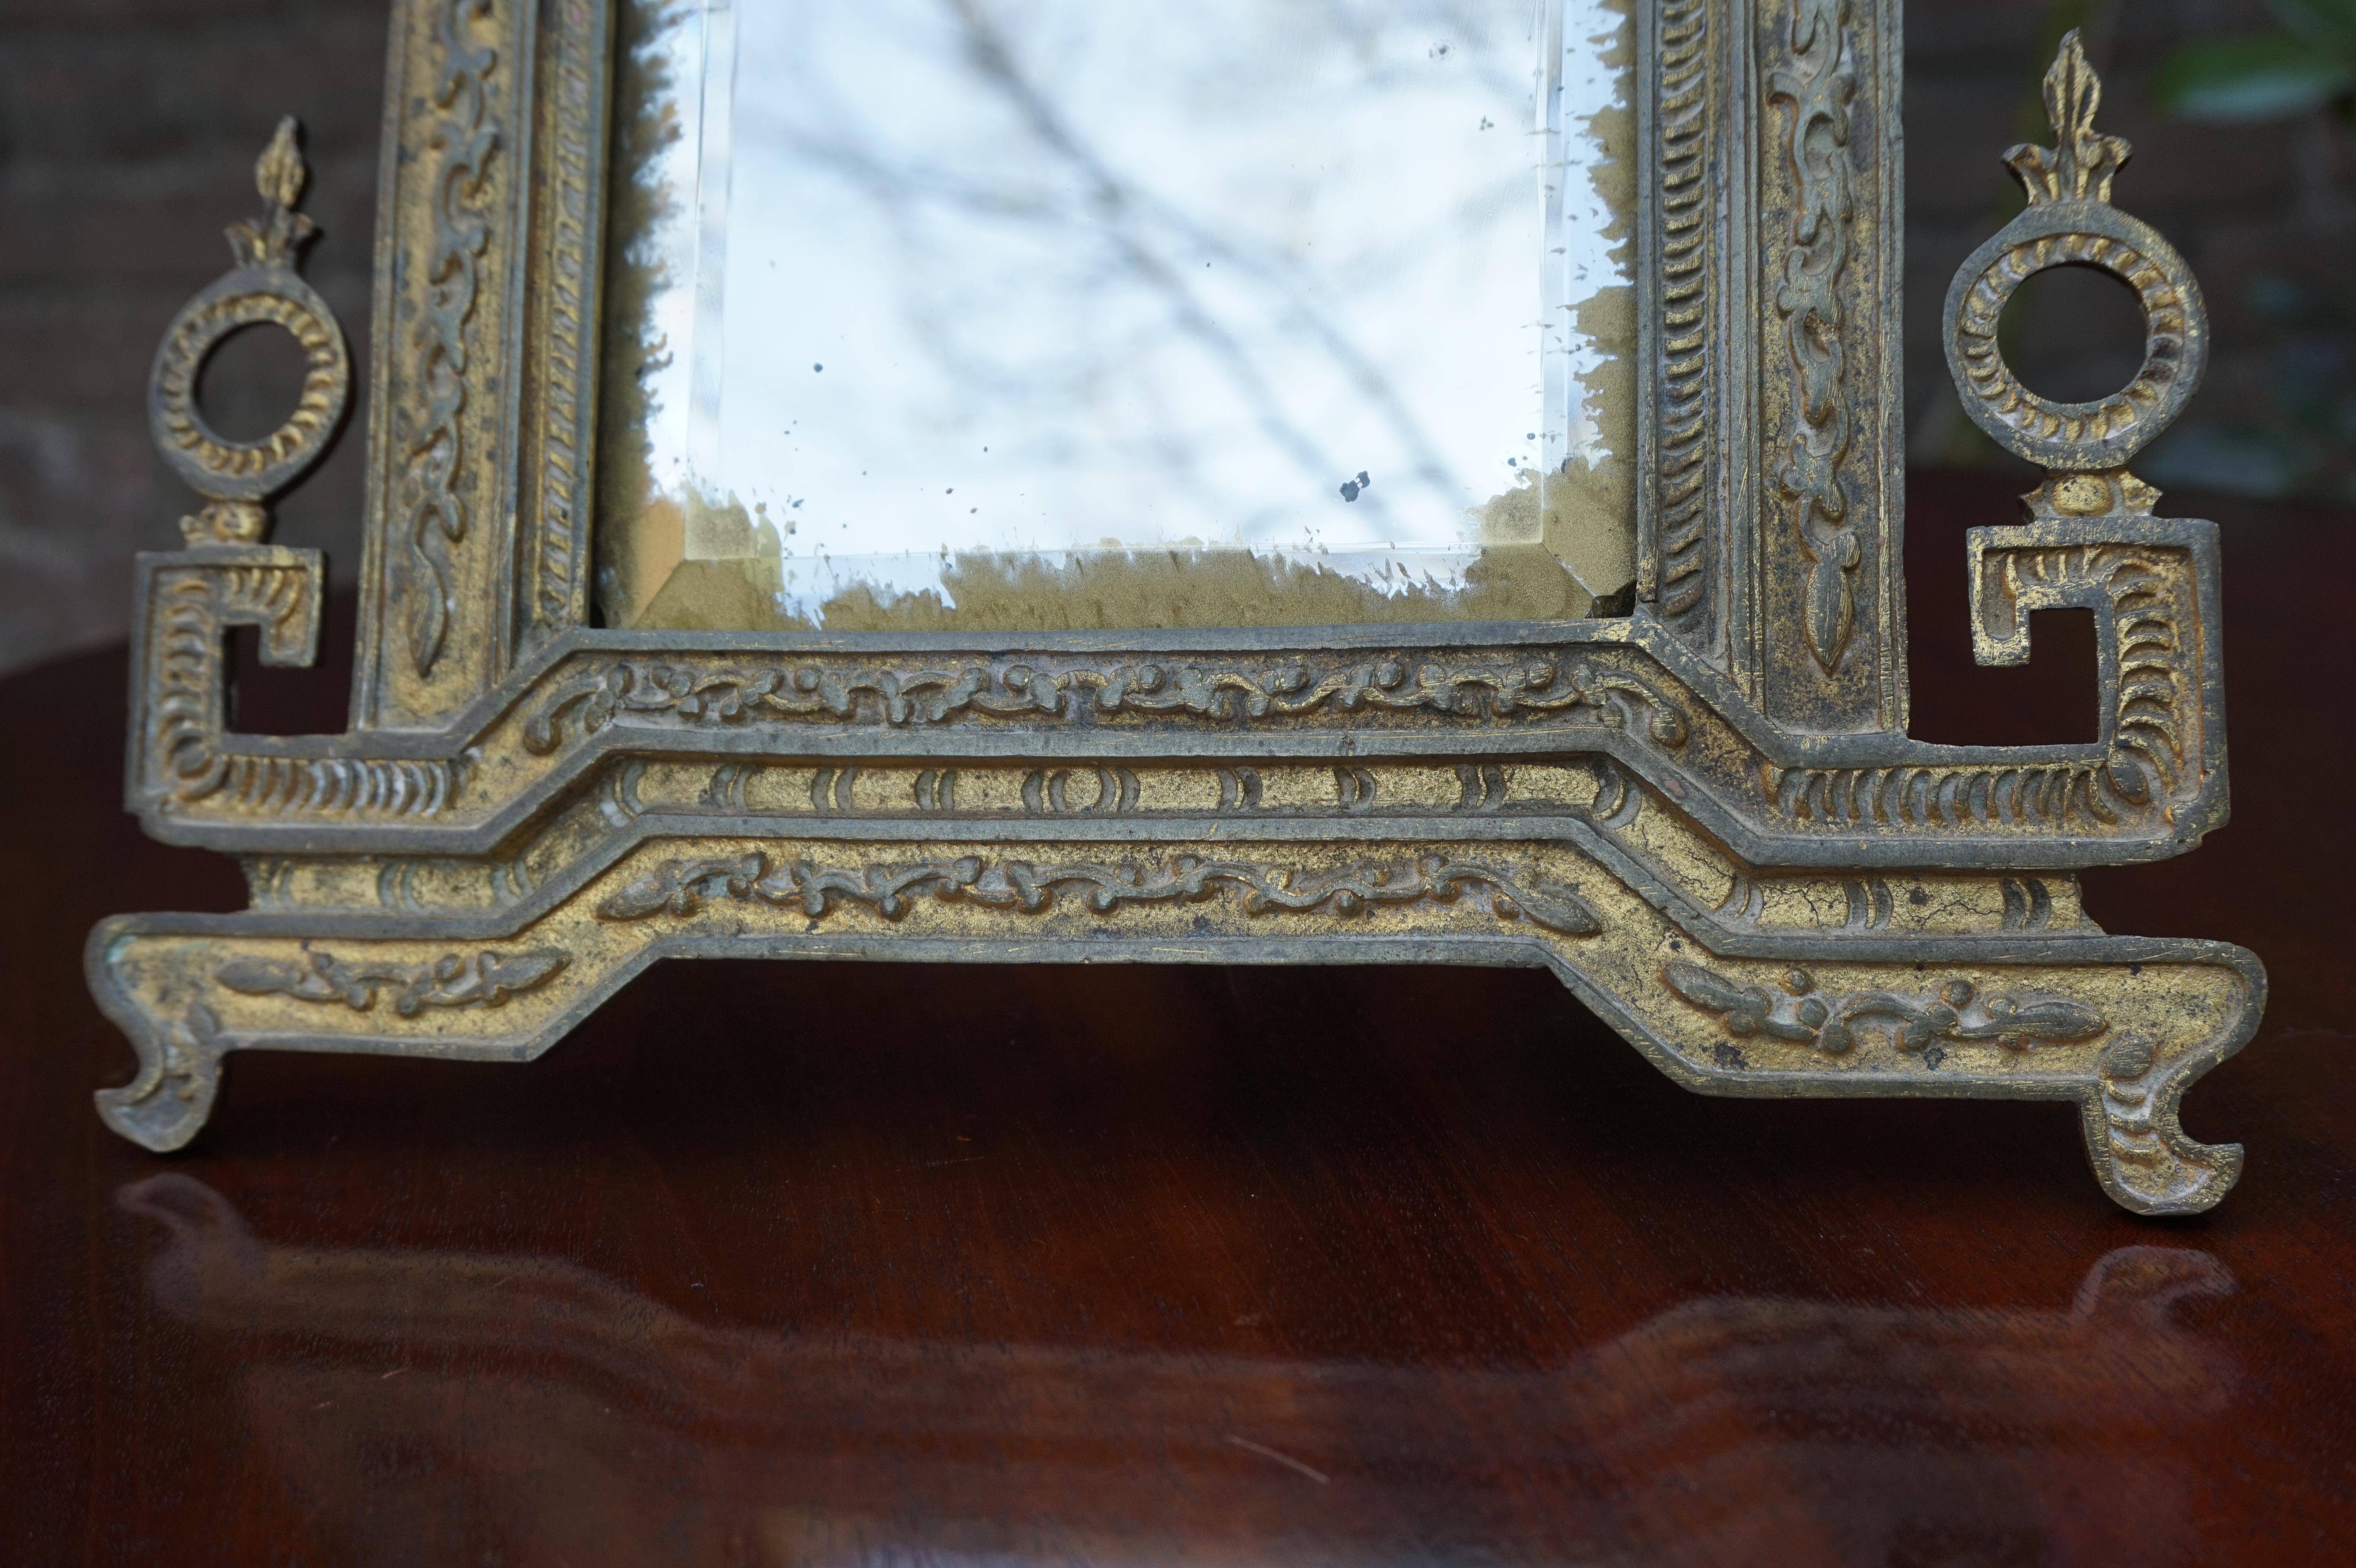 Late 19th or Early 20th Century Chinese or Chinoiserie Gilt Ormolu Table Mirror For Sale 1